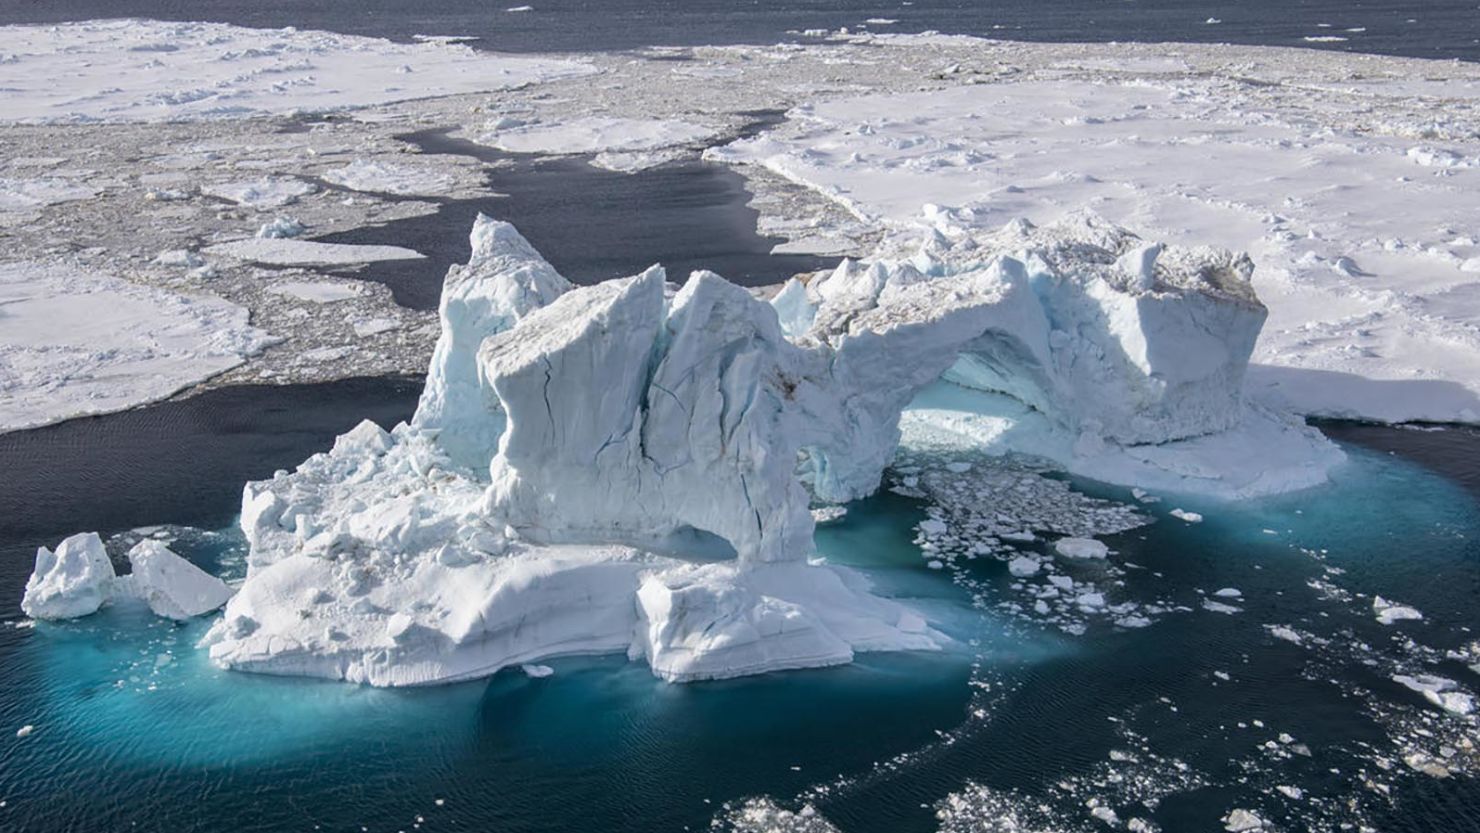 Aerial view taken off James Ross Island in the Weddell Sea, in the Antarctic (see GPS).
Greenpeace is conducting scientific research and documenting the Antarctic's unique wildlife, to strengthen the proposal to create the largest protected area on the planet, an Antarctic Ocean Sanctuary.